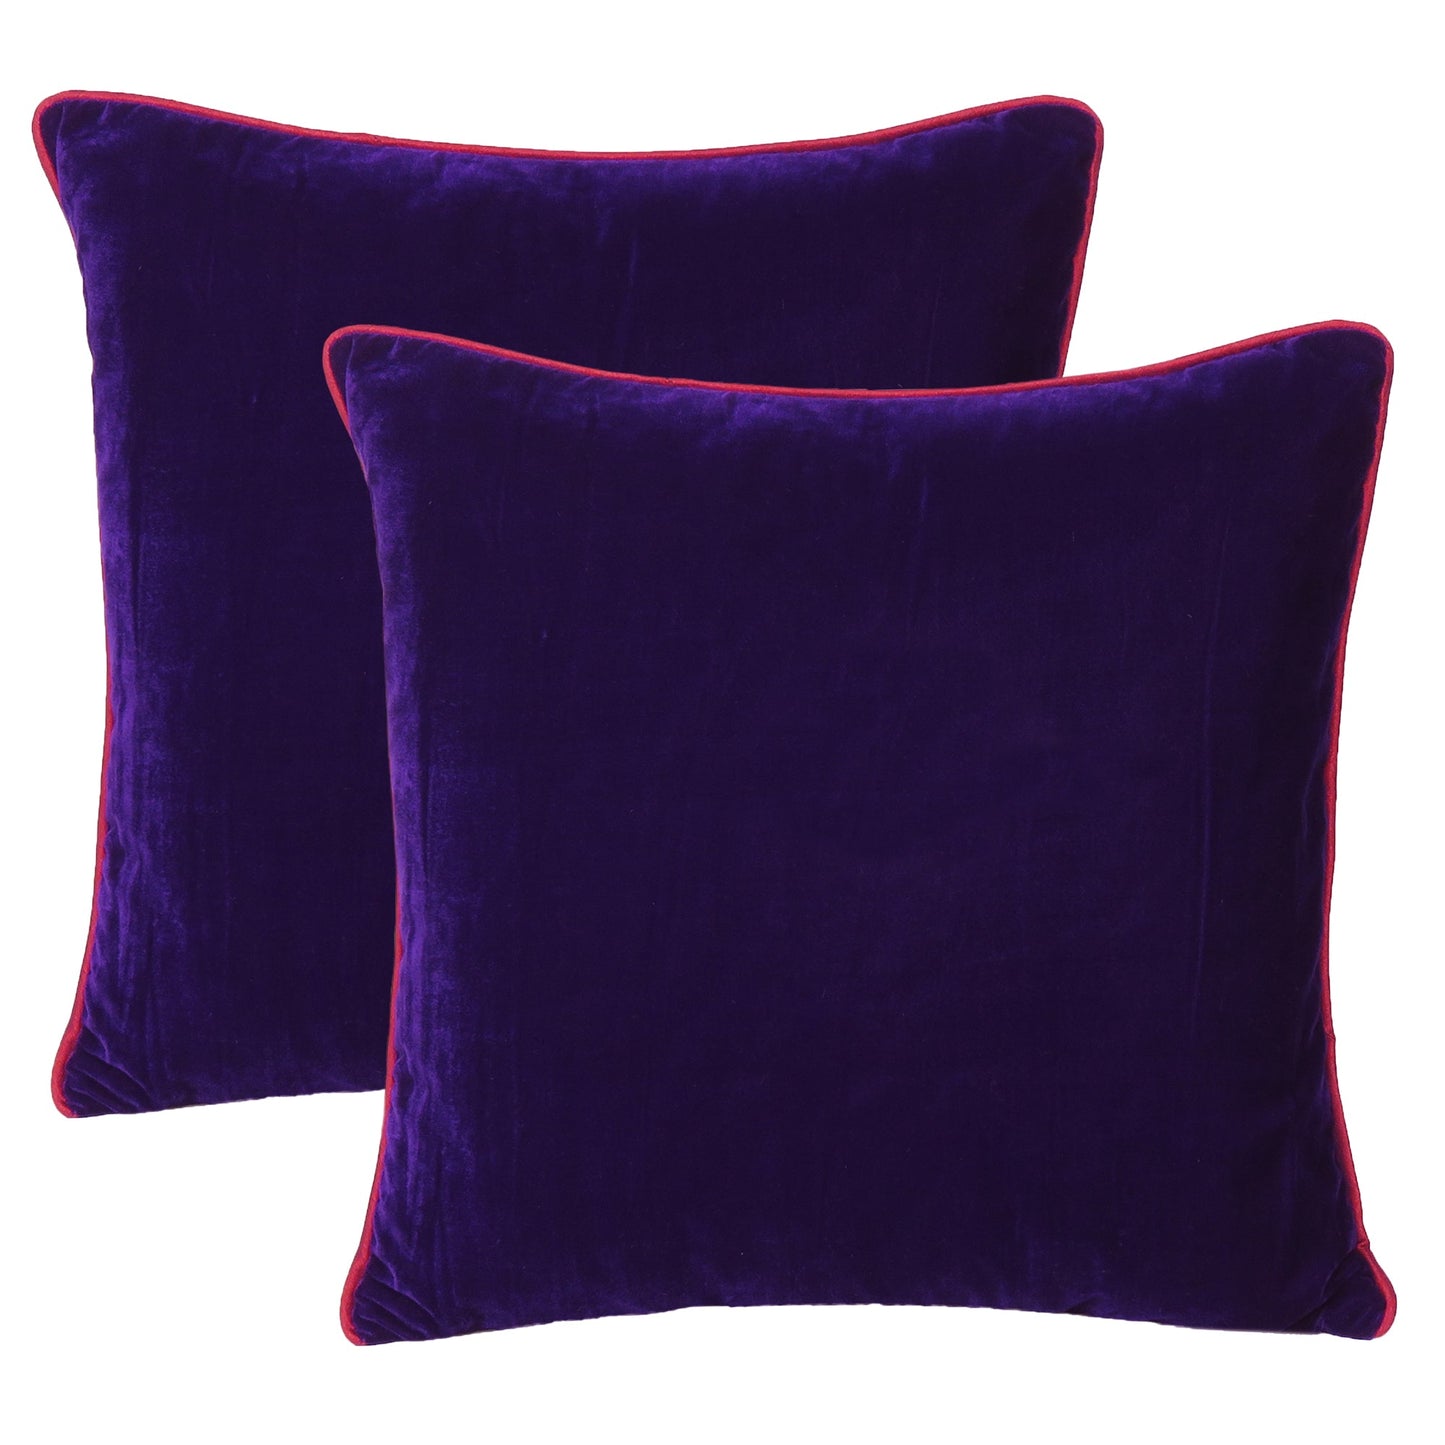 Purple Velvet Cushion Cover with Red Piping Edge in Set of 2